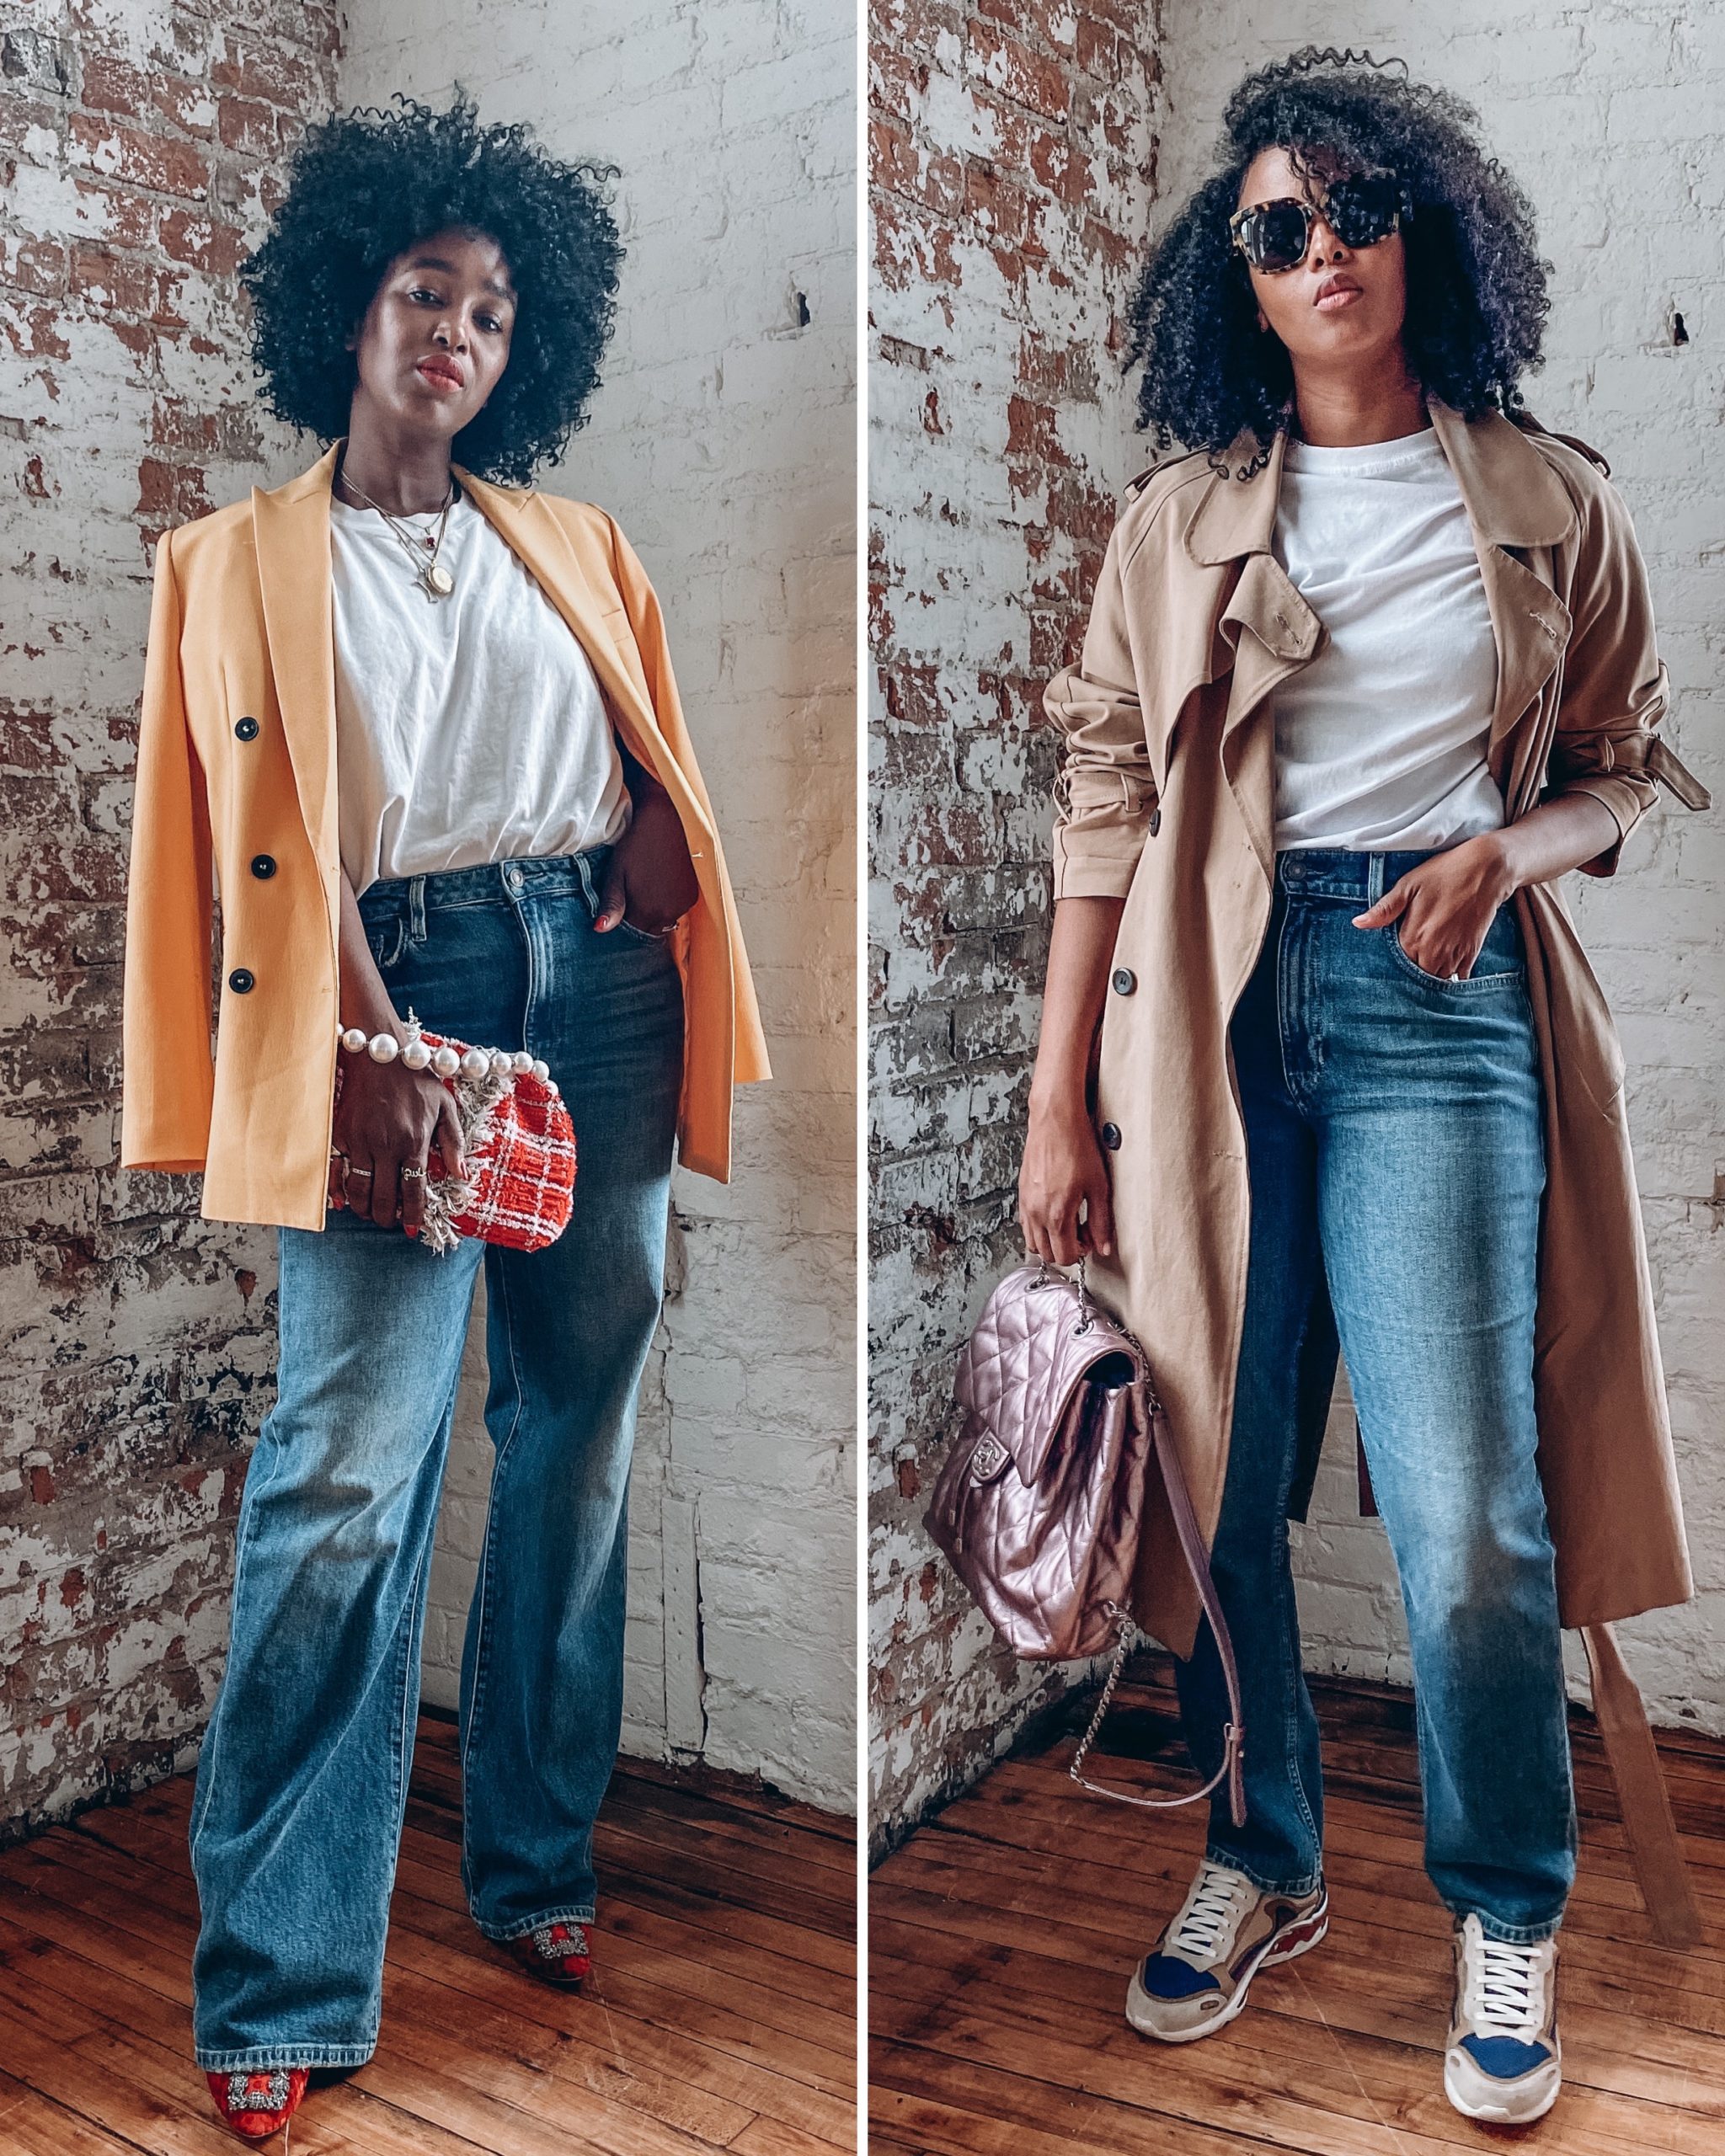 SIX WAYS TO STYLE DENIM - How to Spice up a basic look: The Yusufs